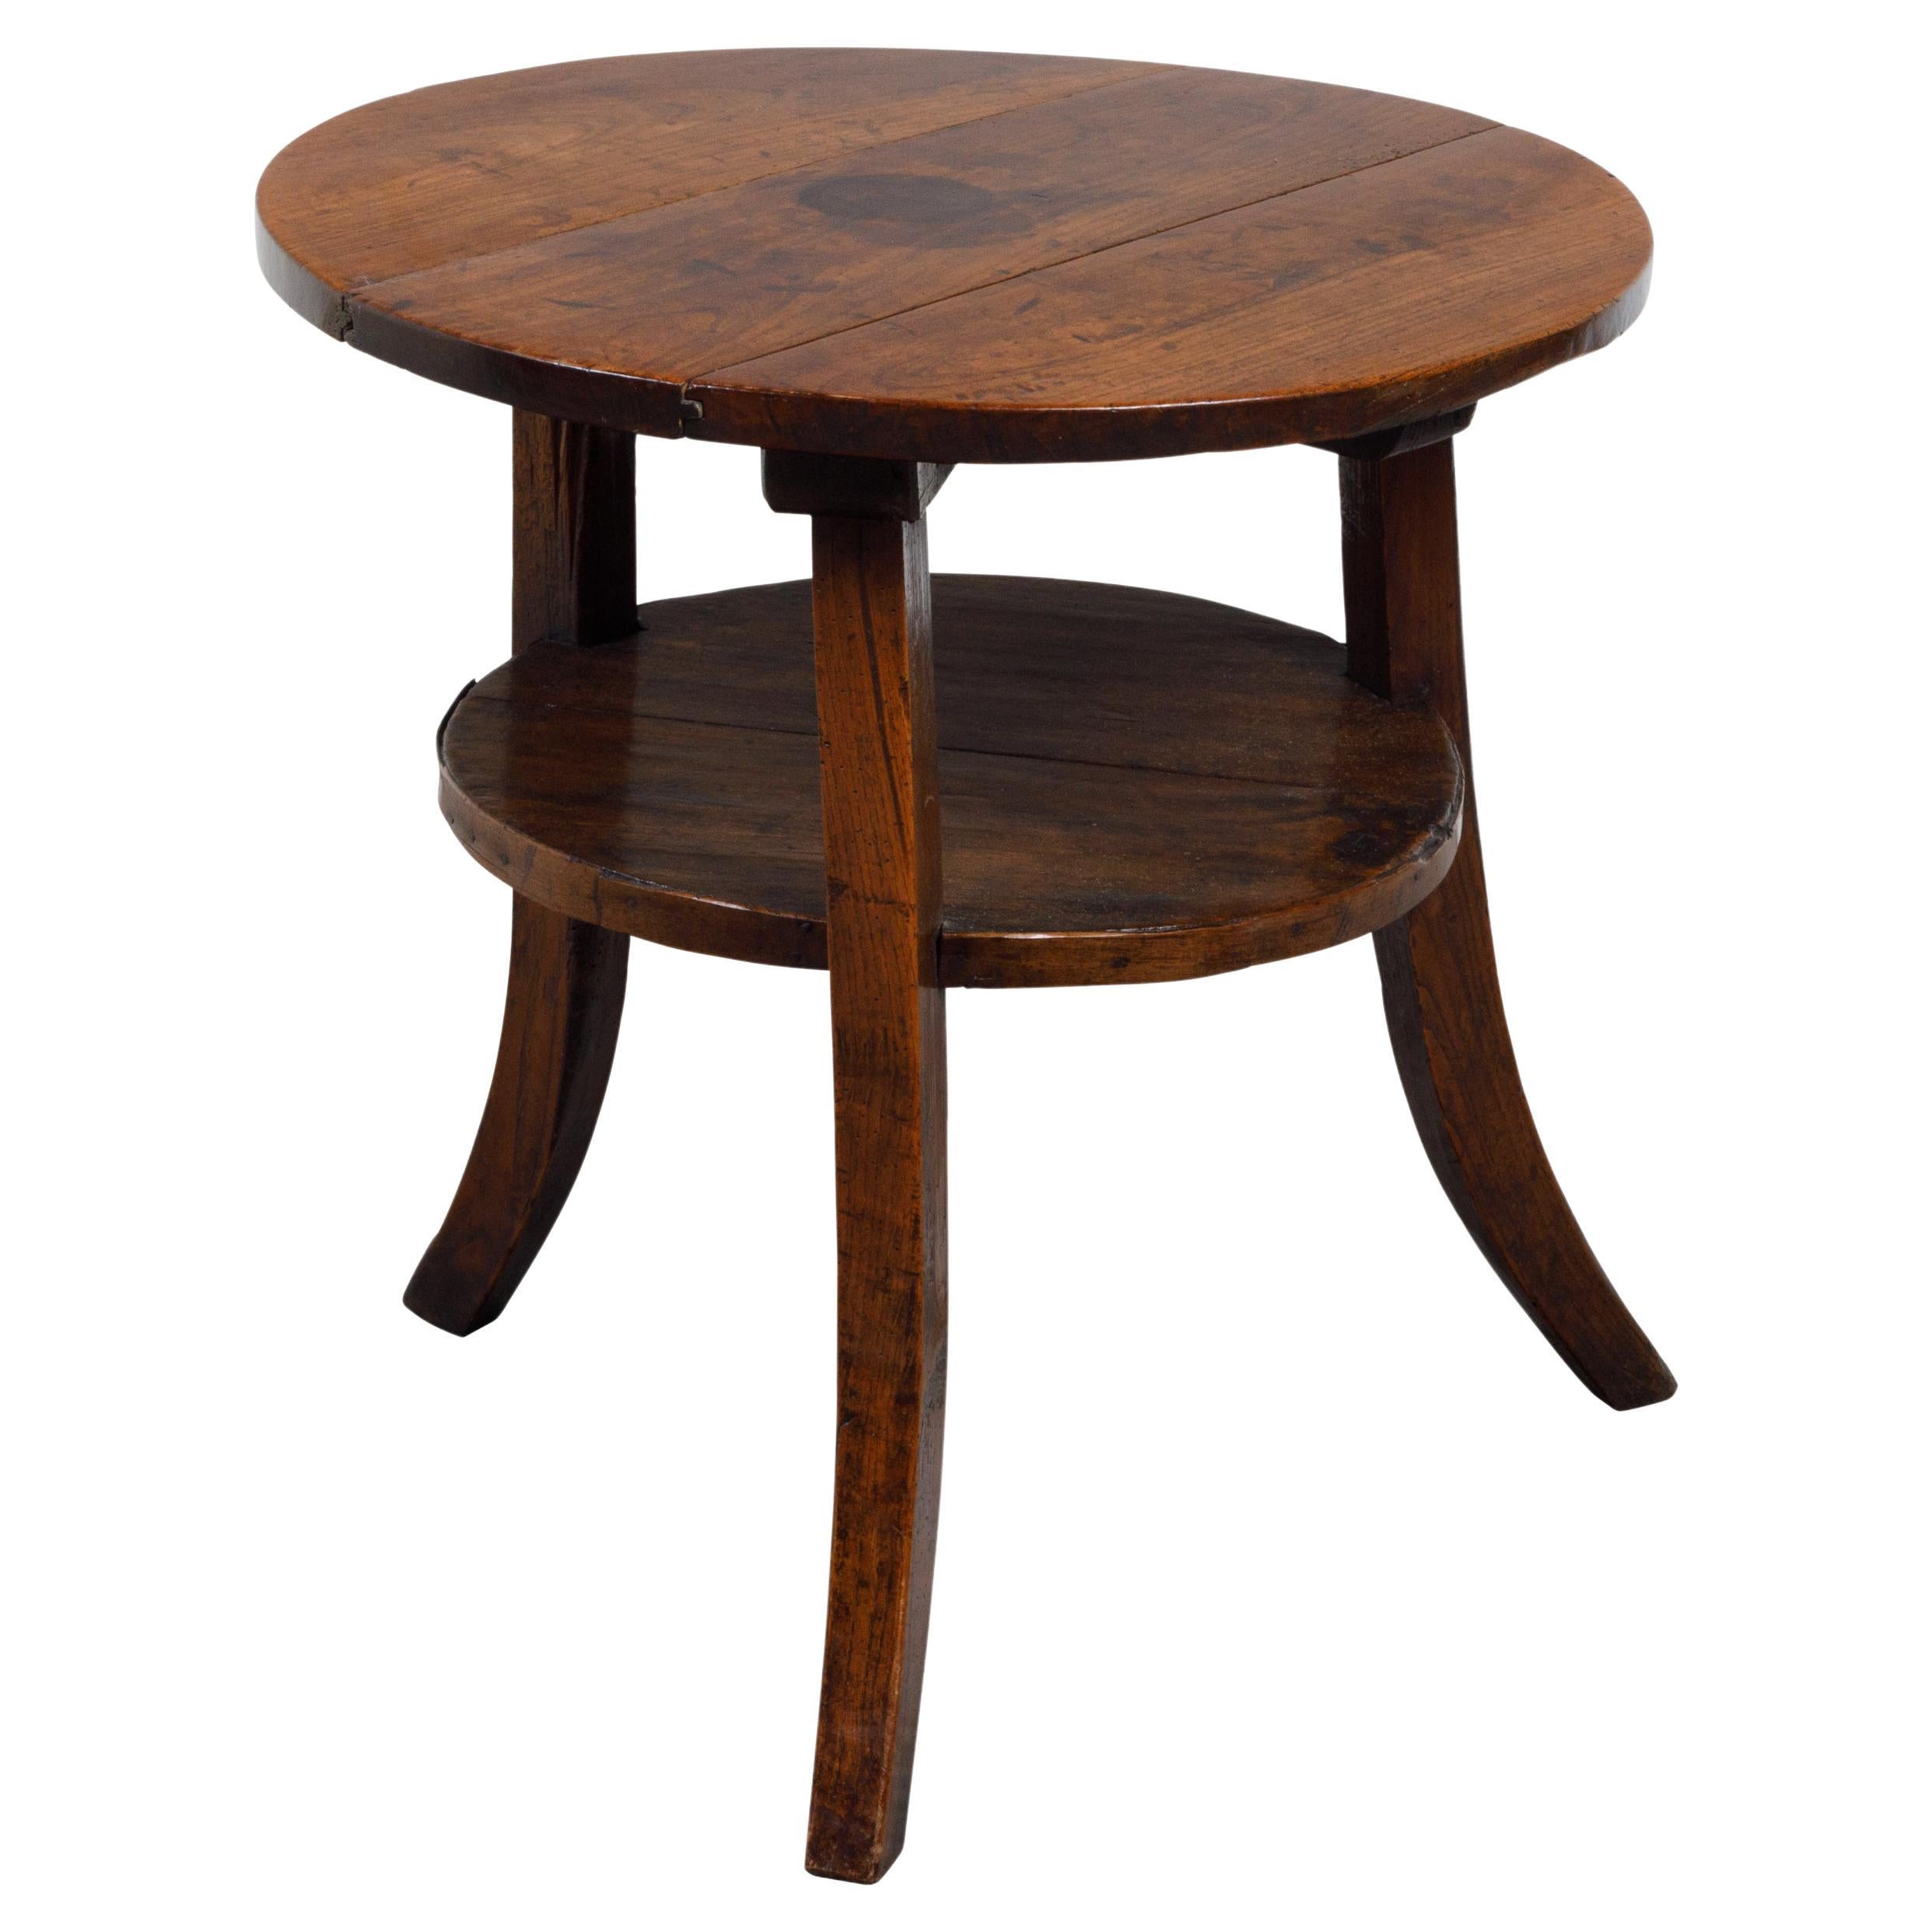 English 19th Century Round Top Walnut Side Table with Shelf and Saber Legs